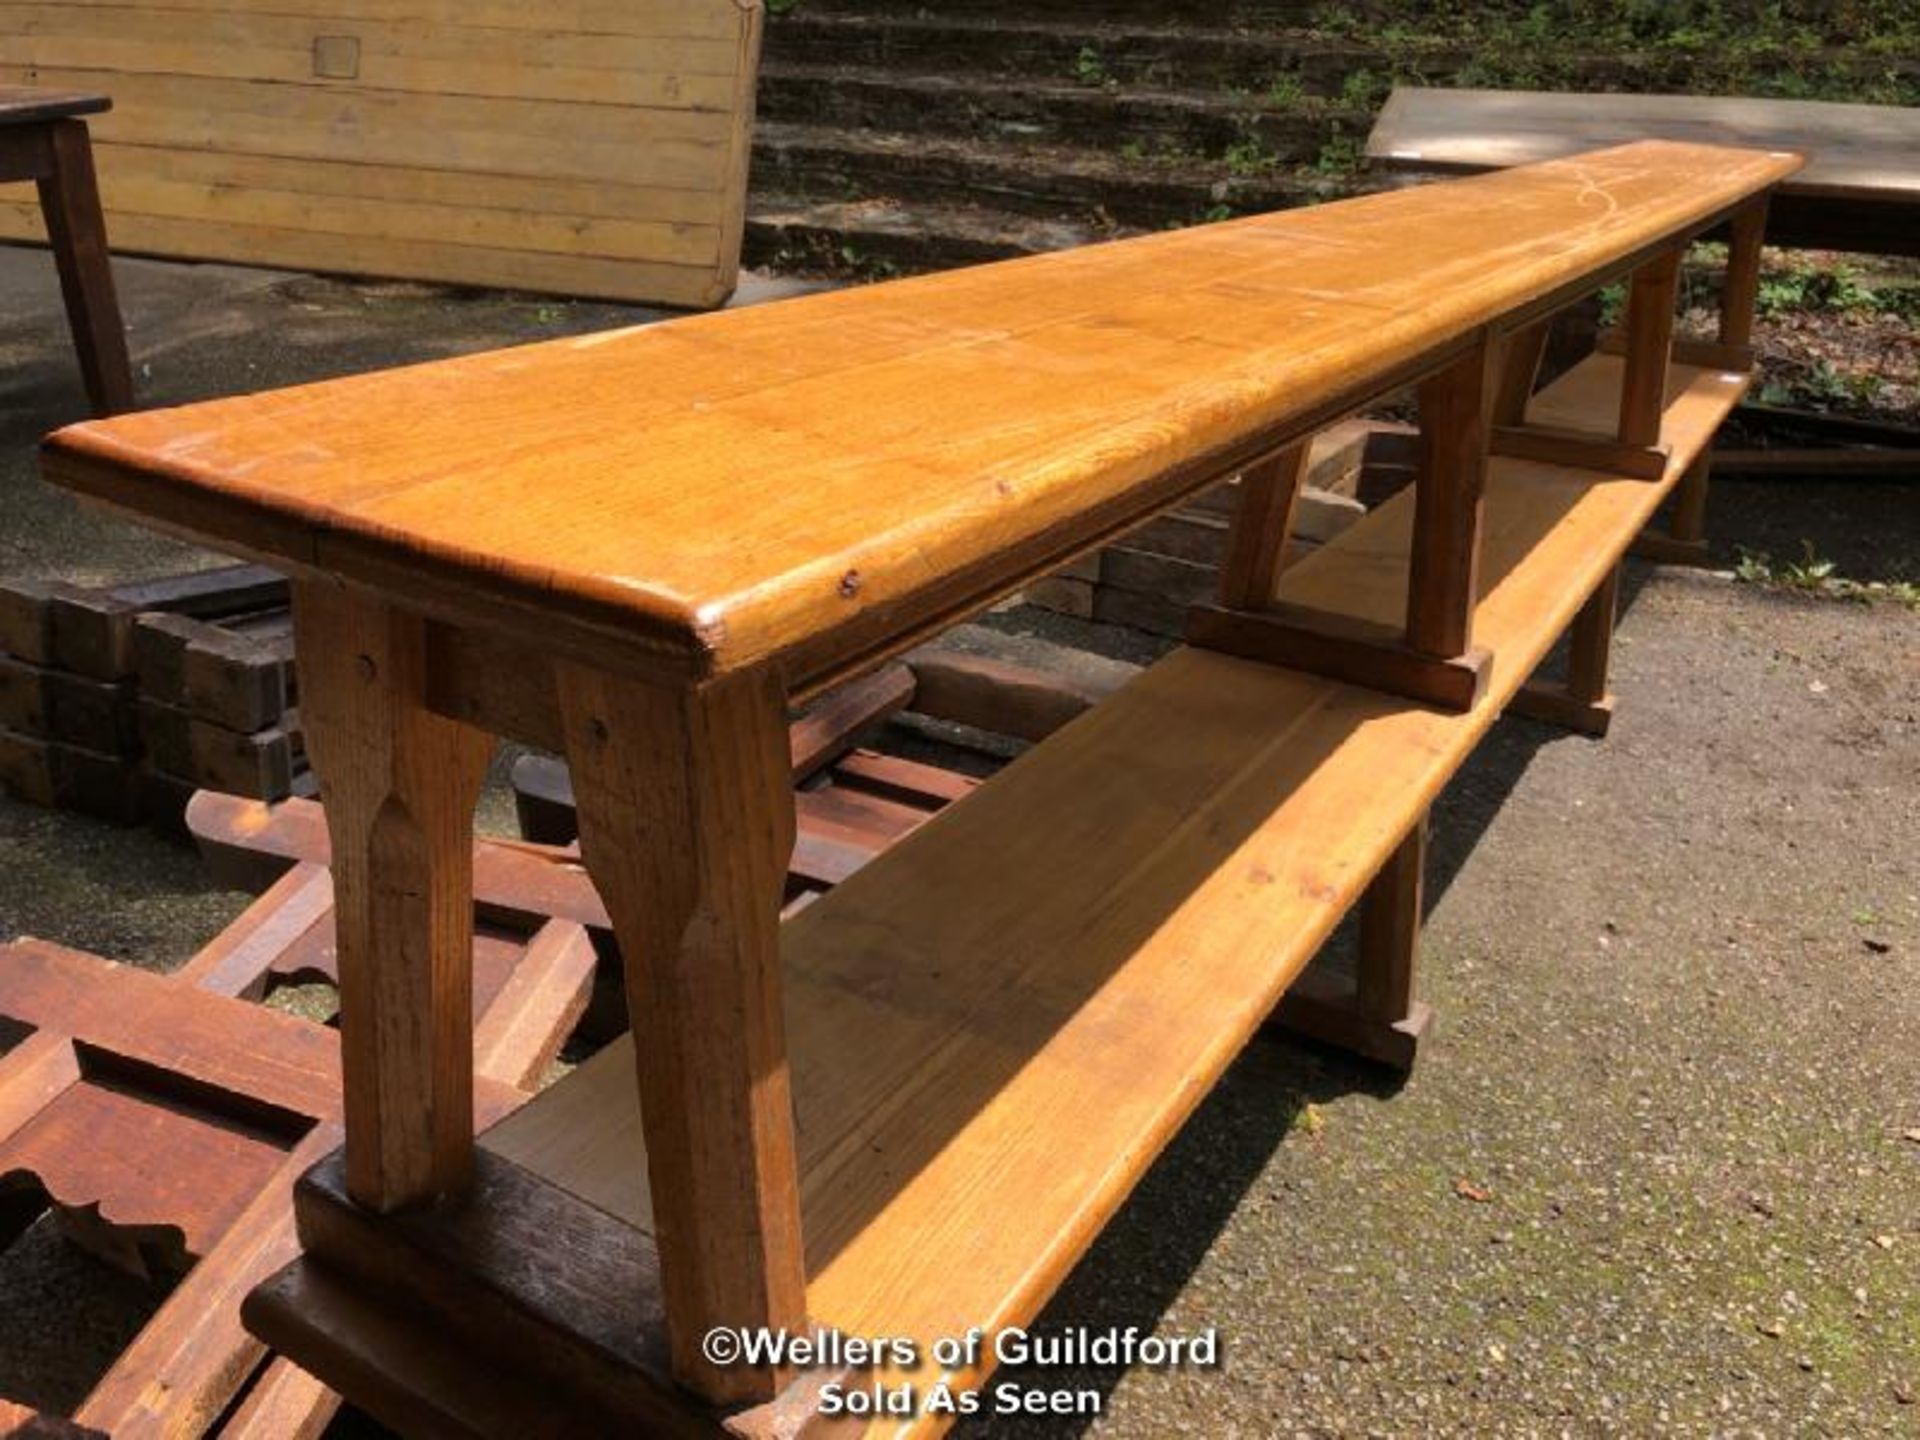 *OAK GYMNASIUM BENCH WITH 4 FEET - 3.5M L - Image 2 of 2